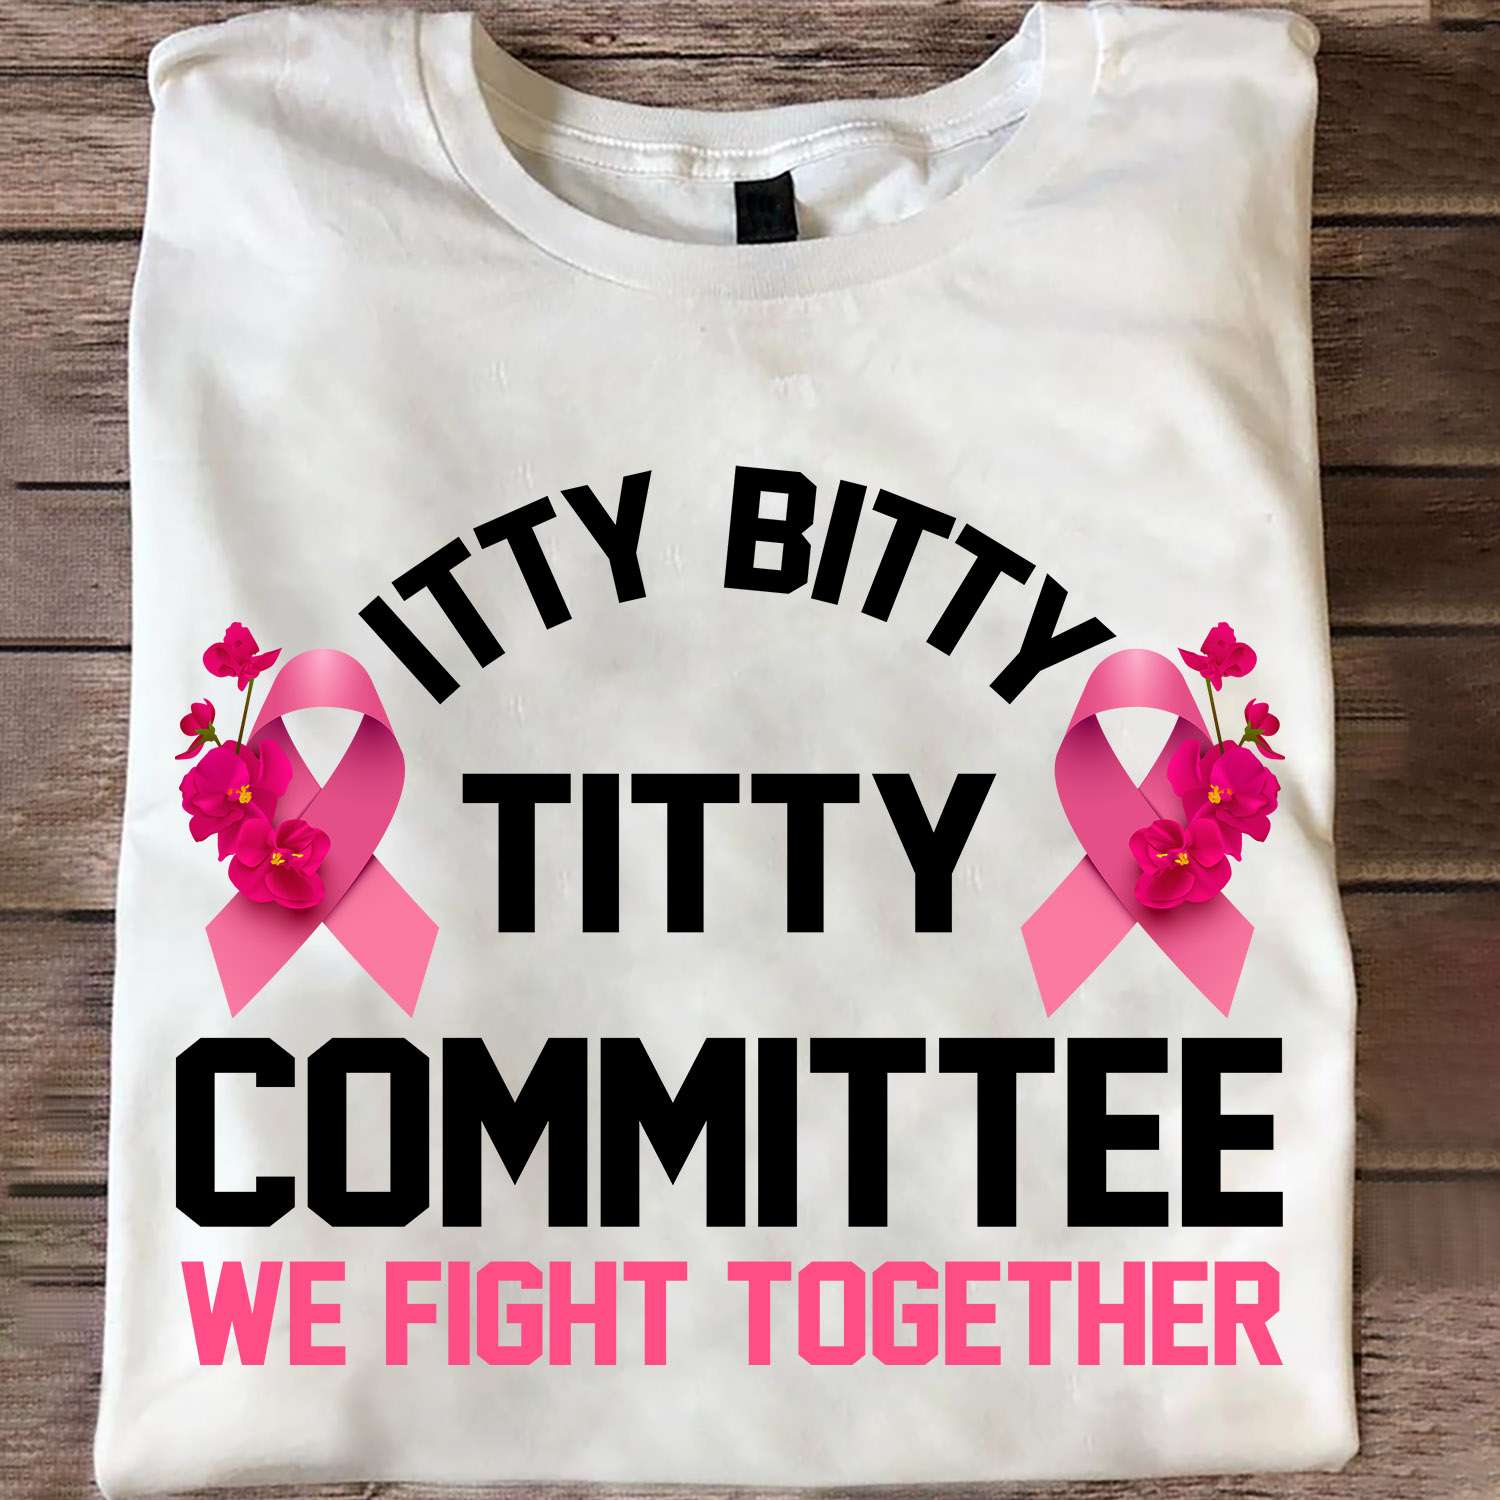 Quote Humour Itty bitty titty committee Pullover Hoodie Funny